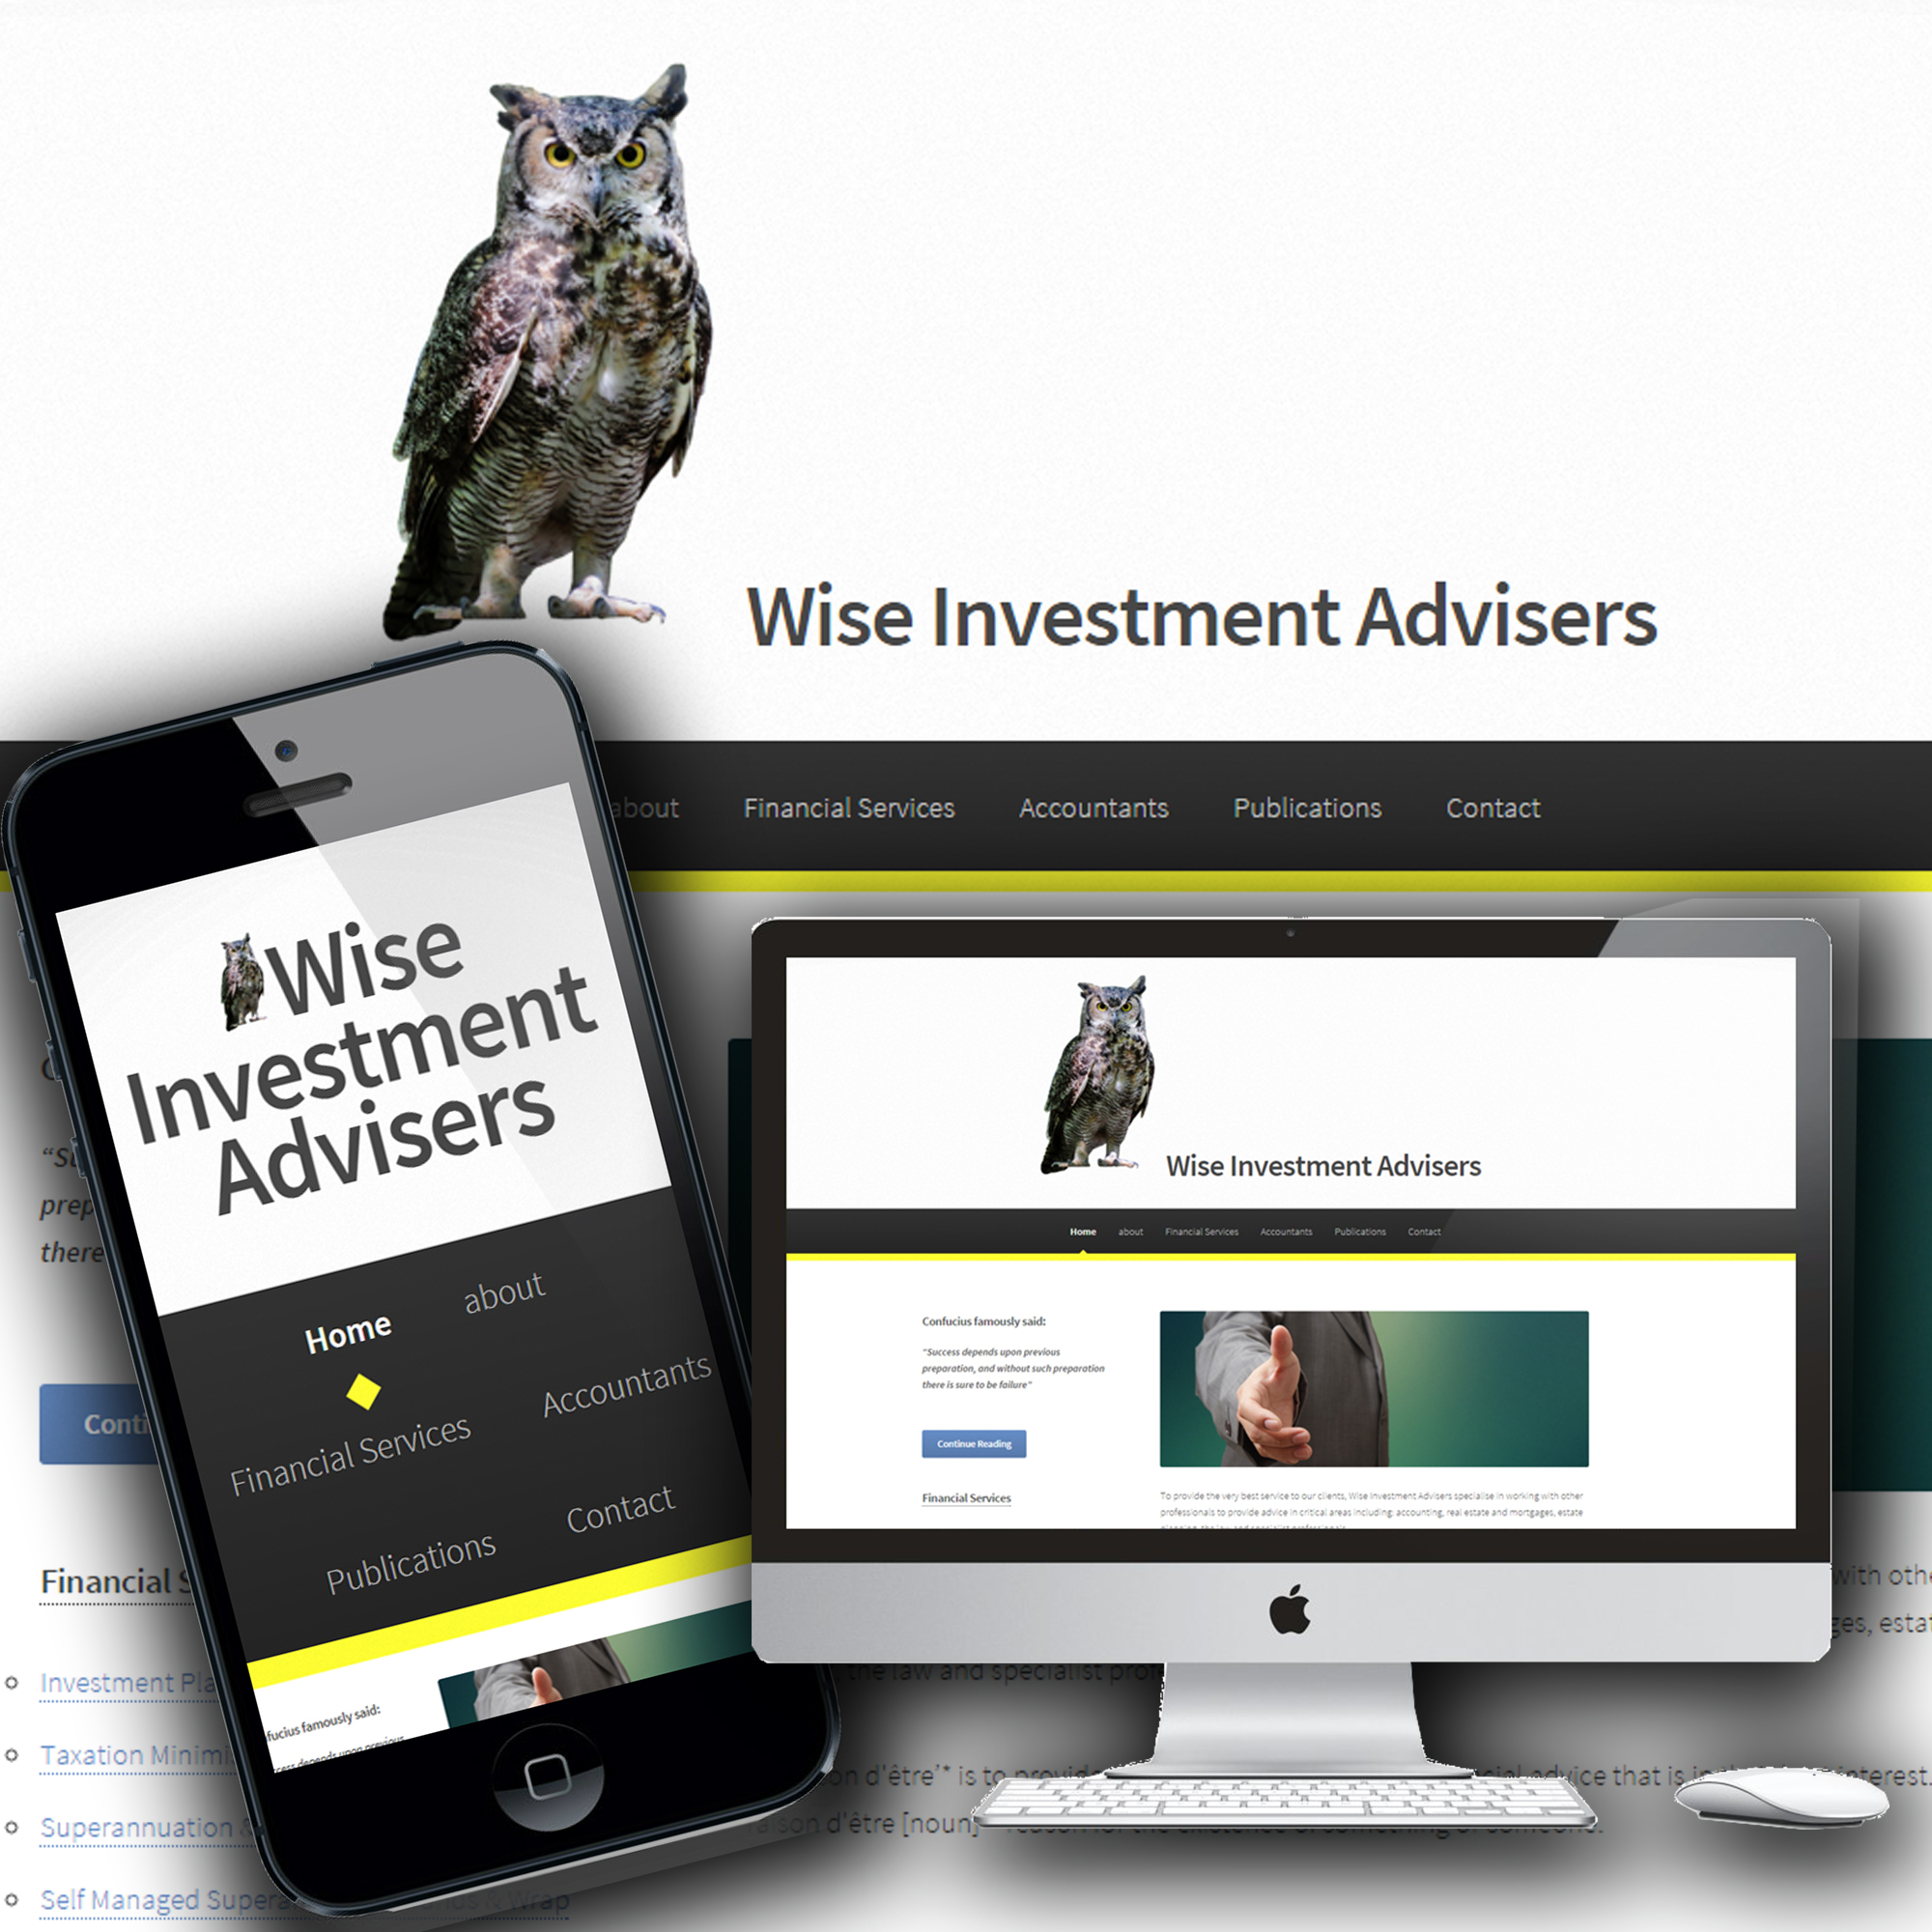 Wise Investment Advisers